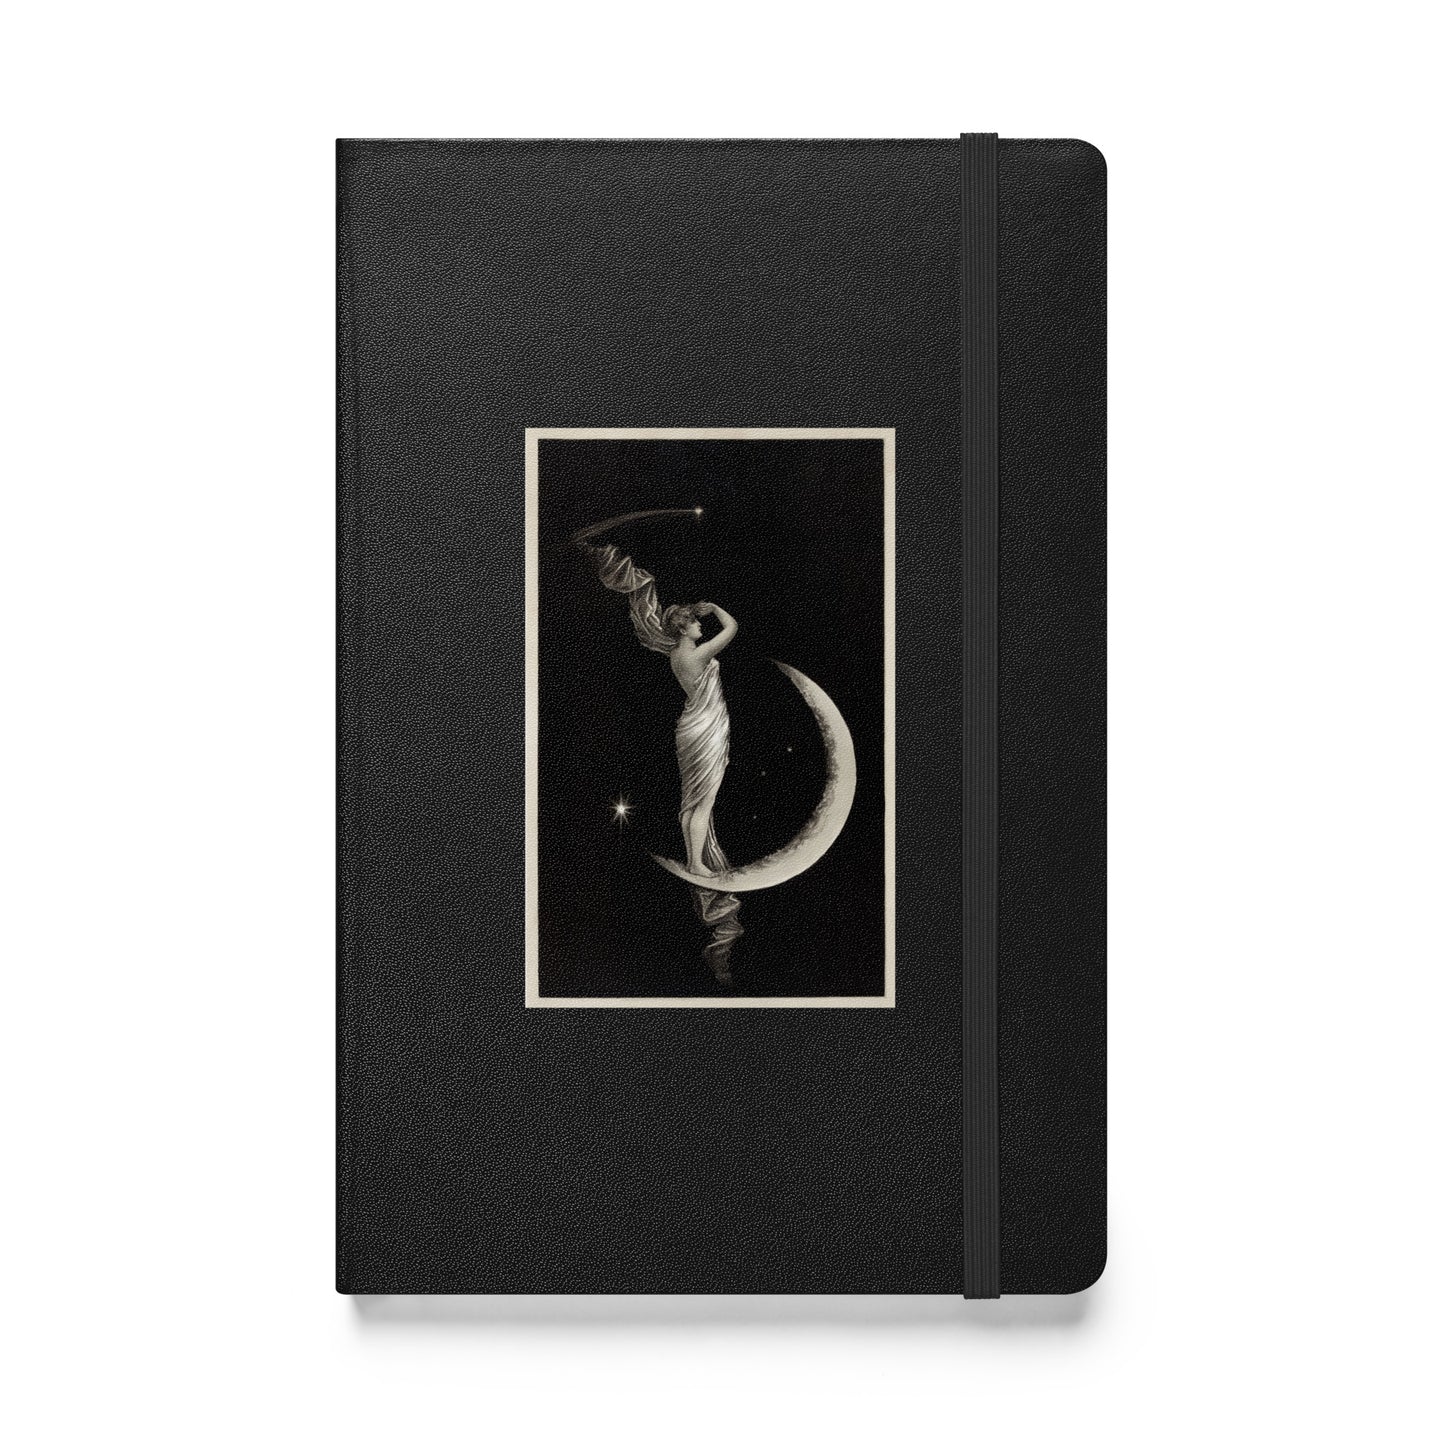 The Universal Favorite Hardcover bound notebook